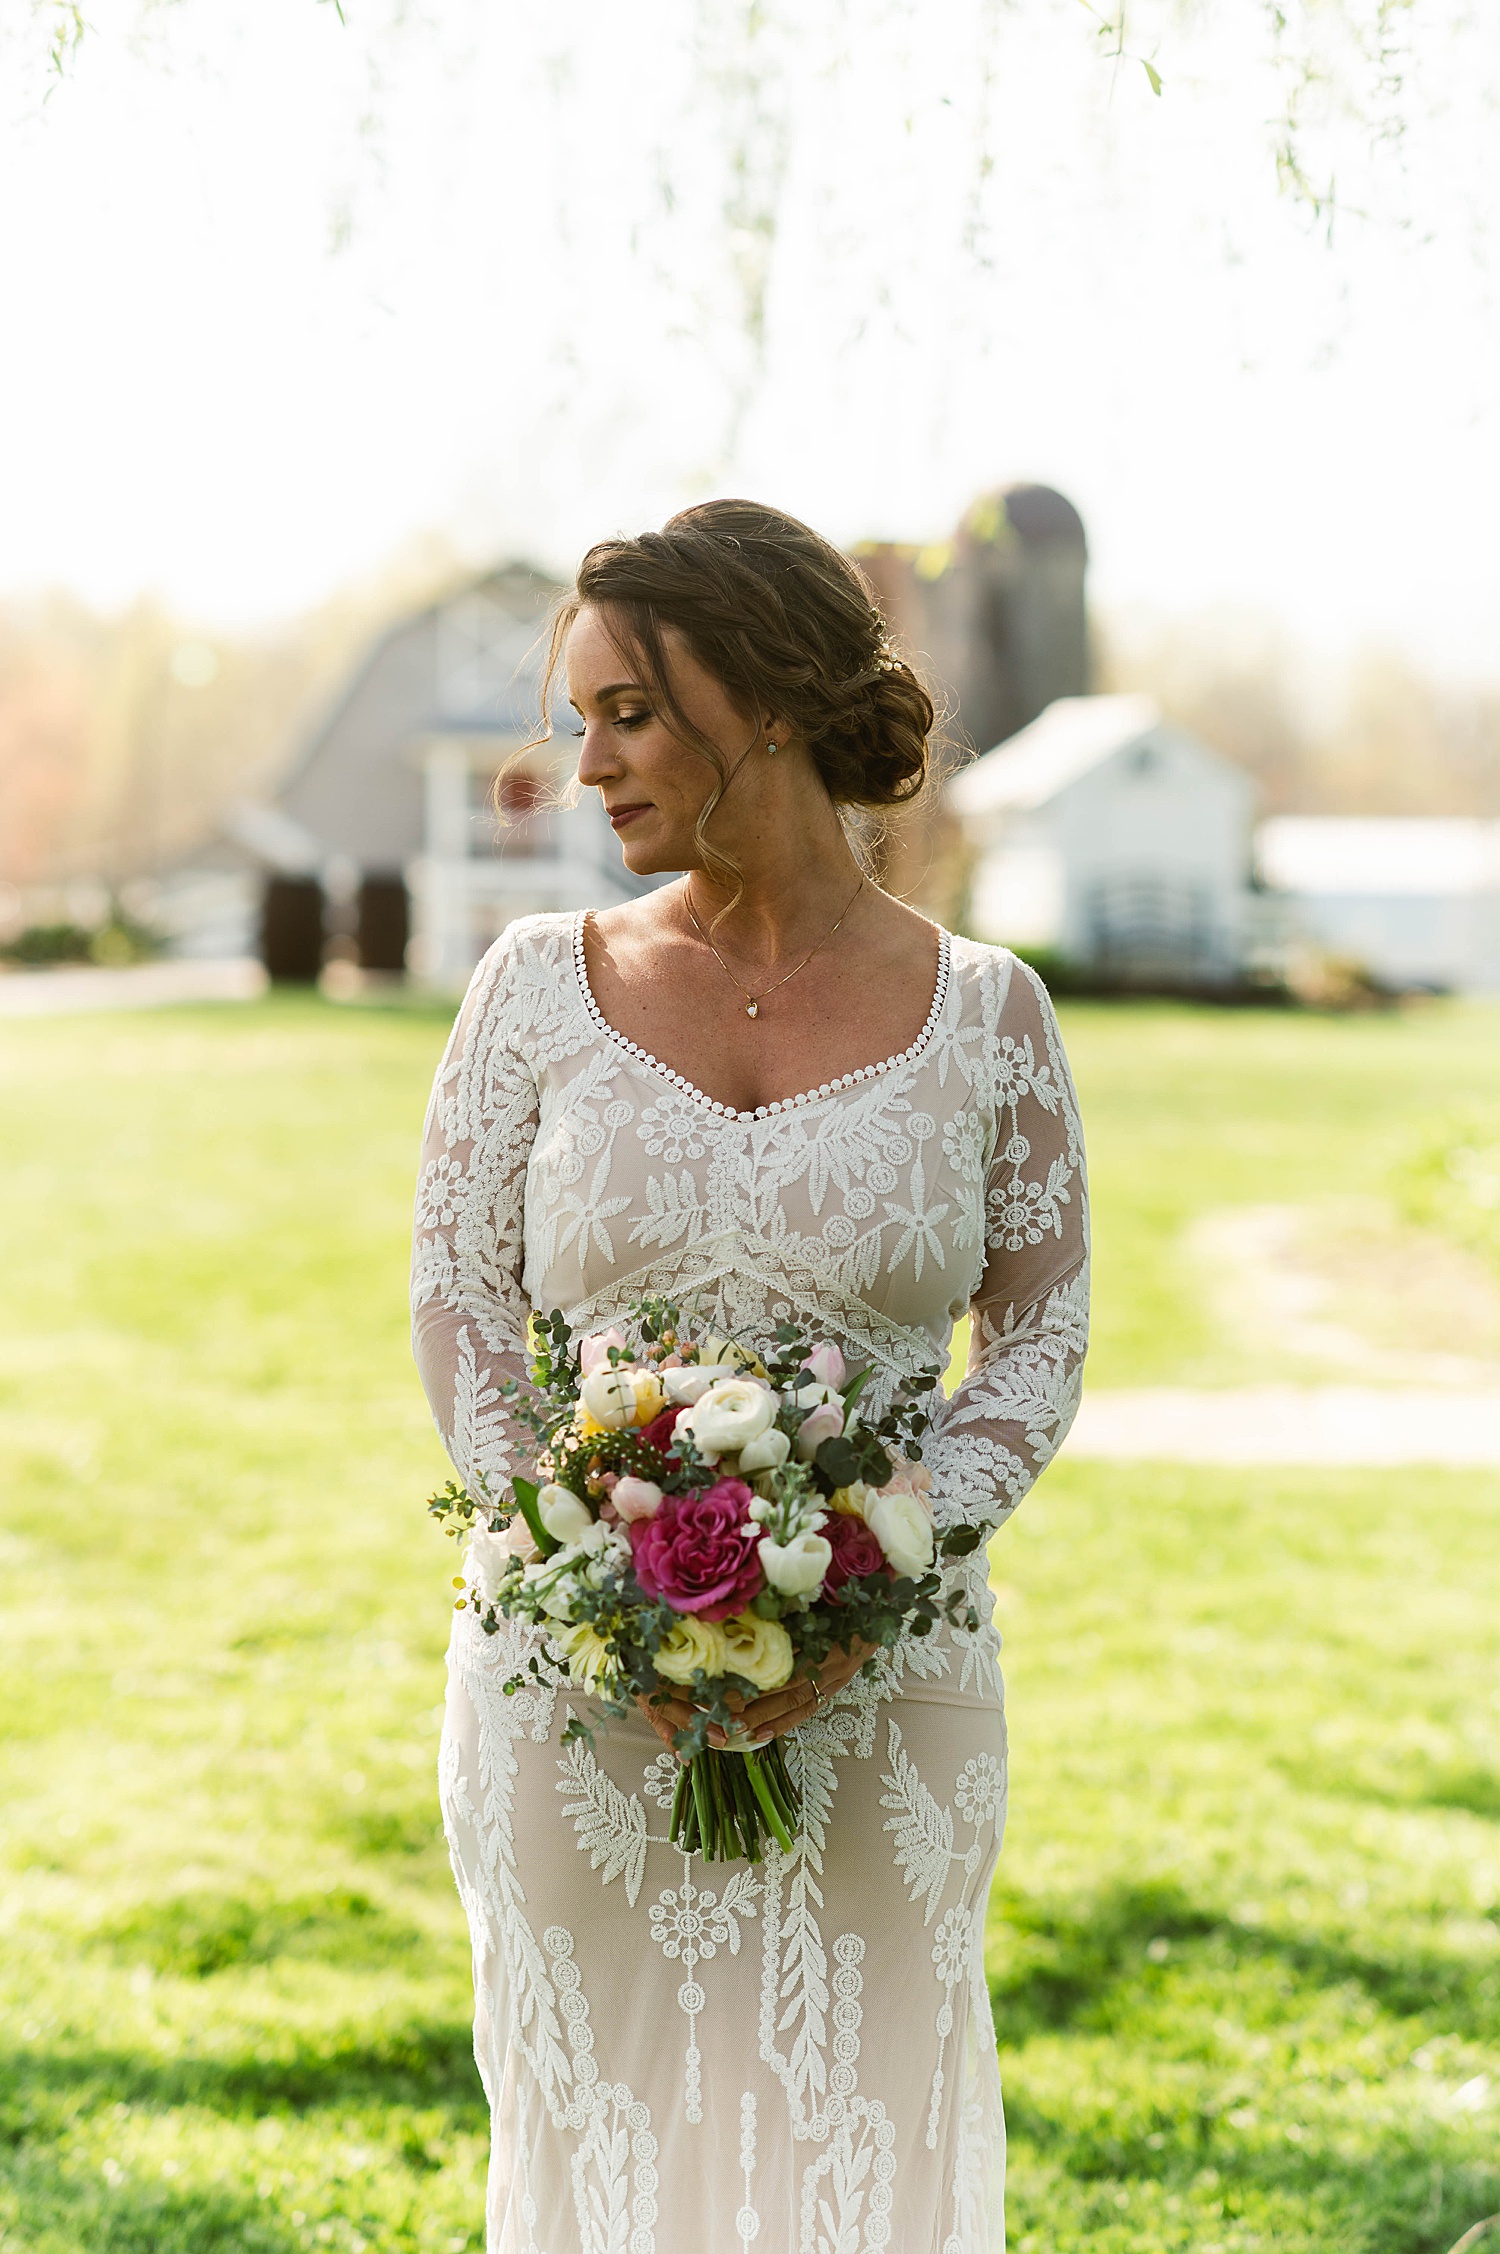 Bride in lace dress with braided updo by Hannah Louise Photo